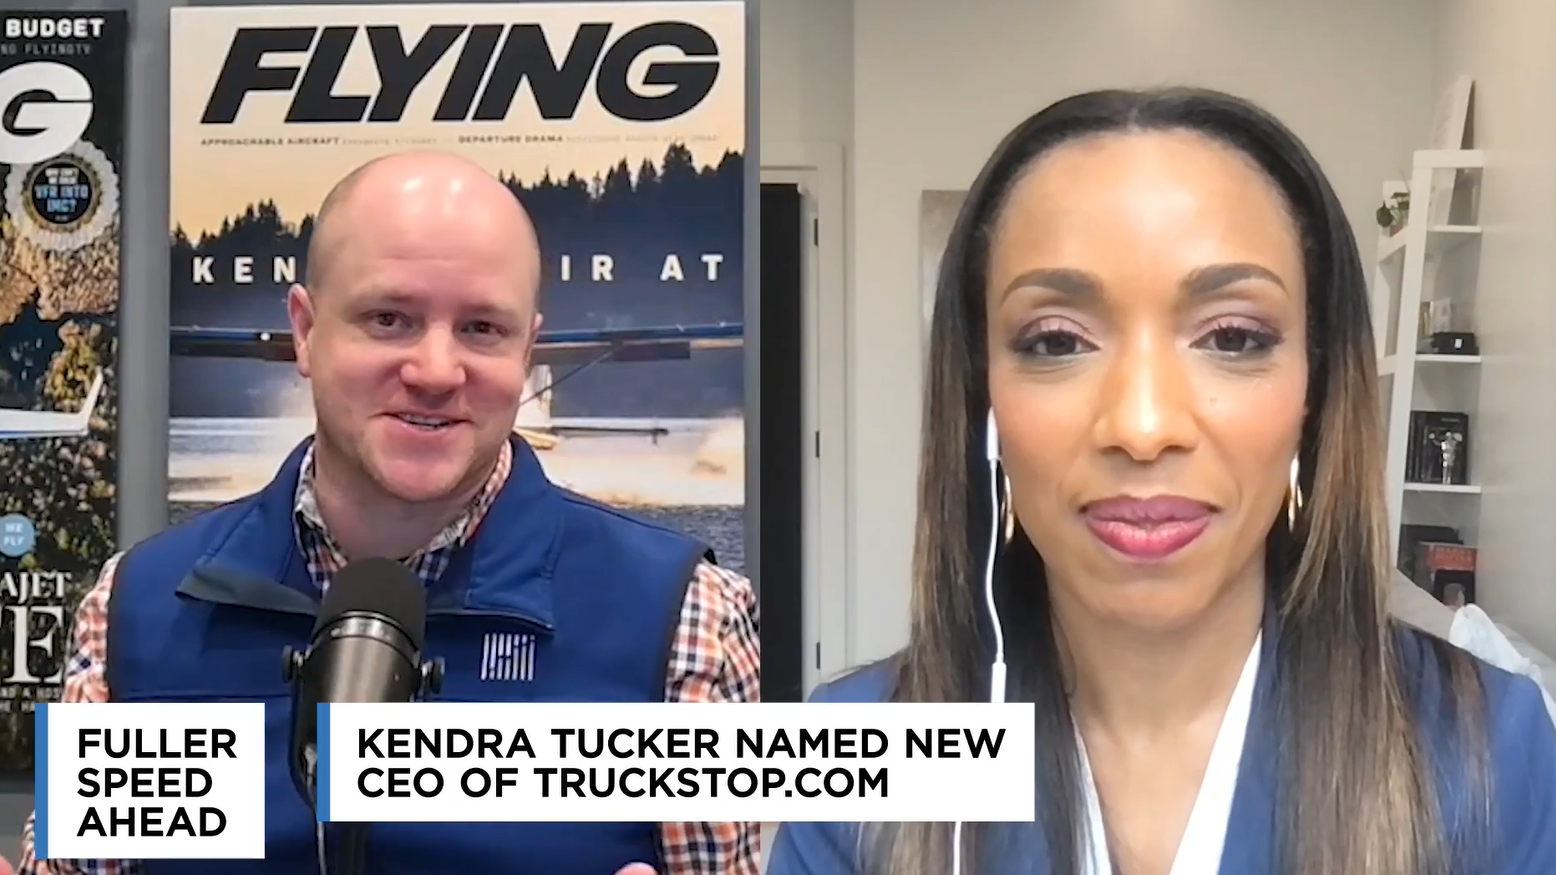 Kendra Tucker is the new CEO of Truckstop.